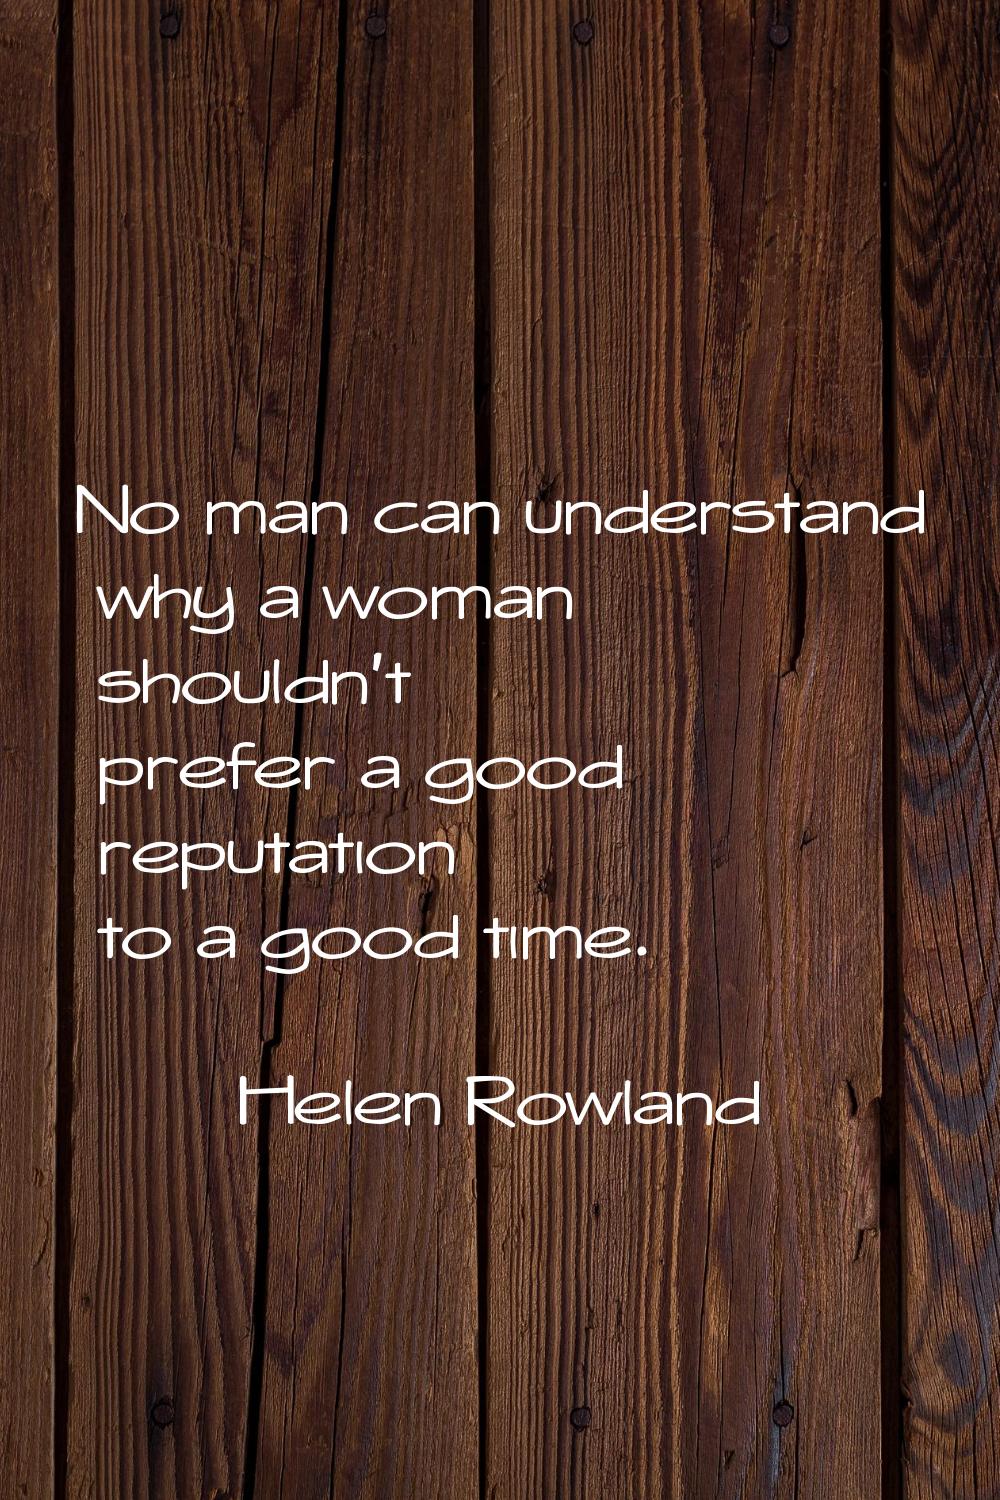 No man can understand why a woman shouldn't prefer a good reputation to a good time.